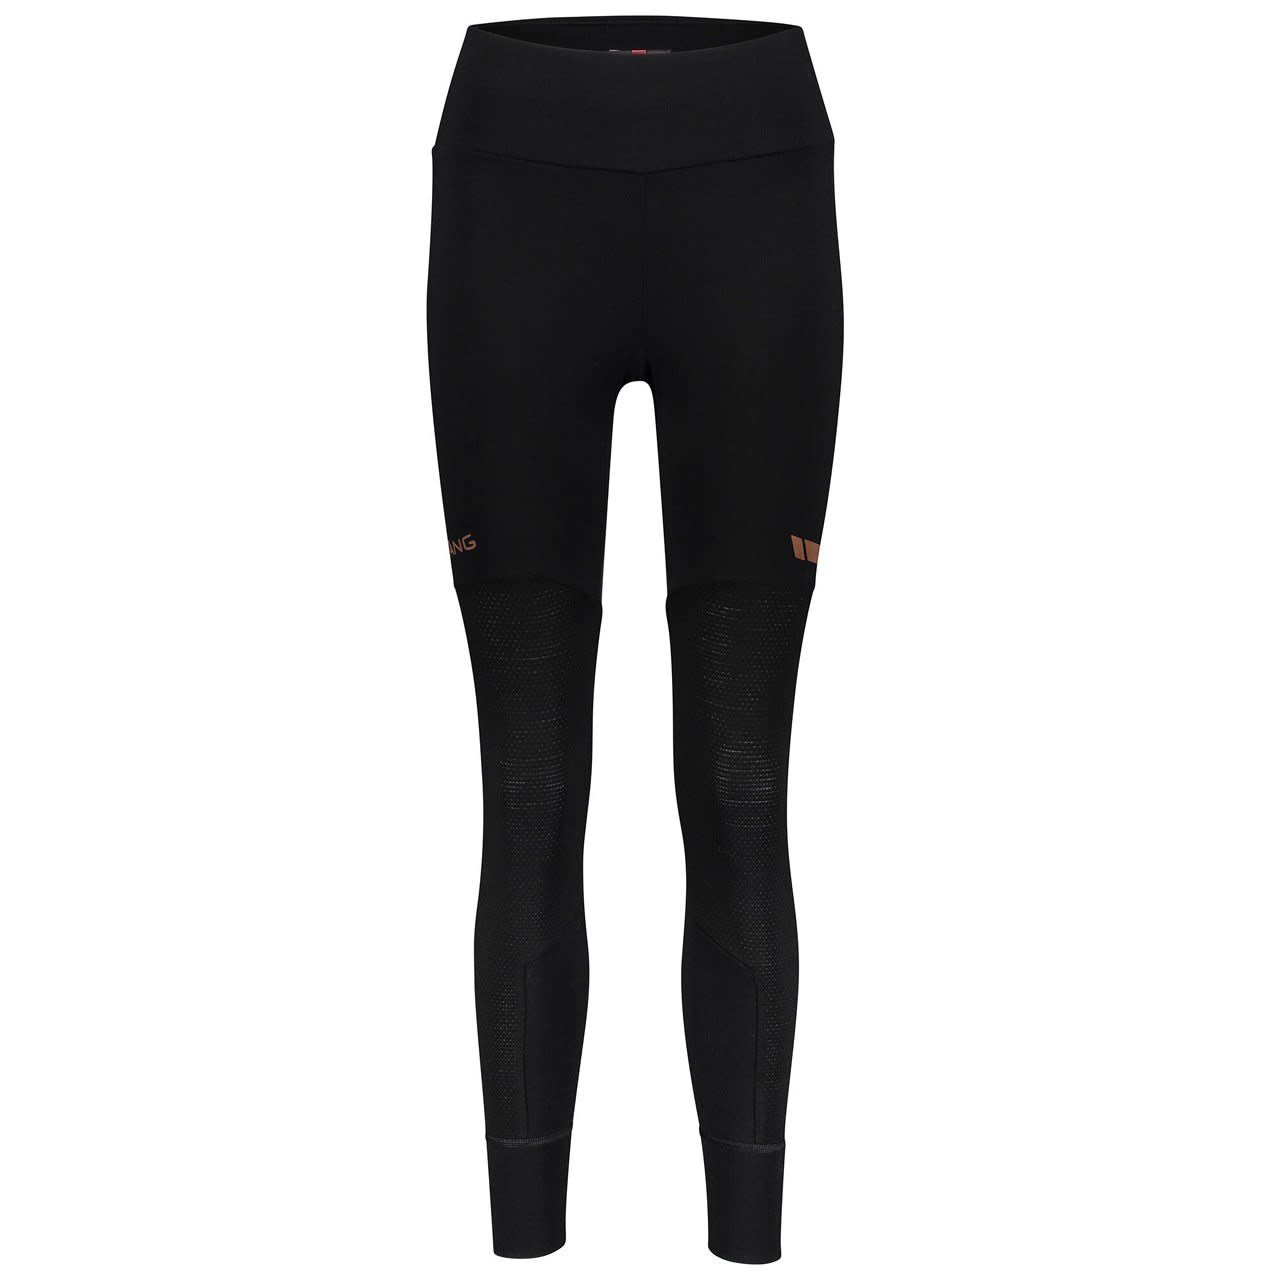 Ulvang Women's Pace Tights  Black/Copper